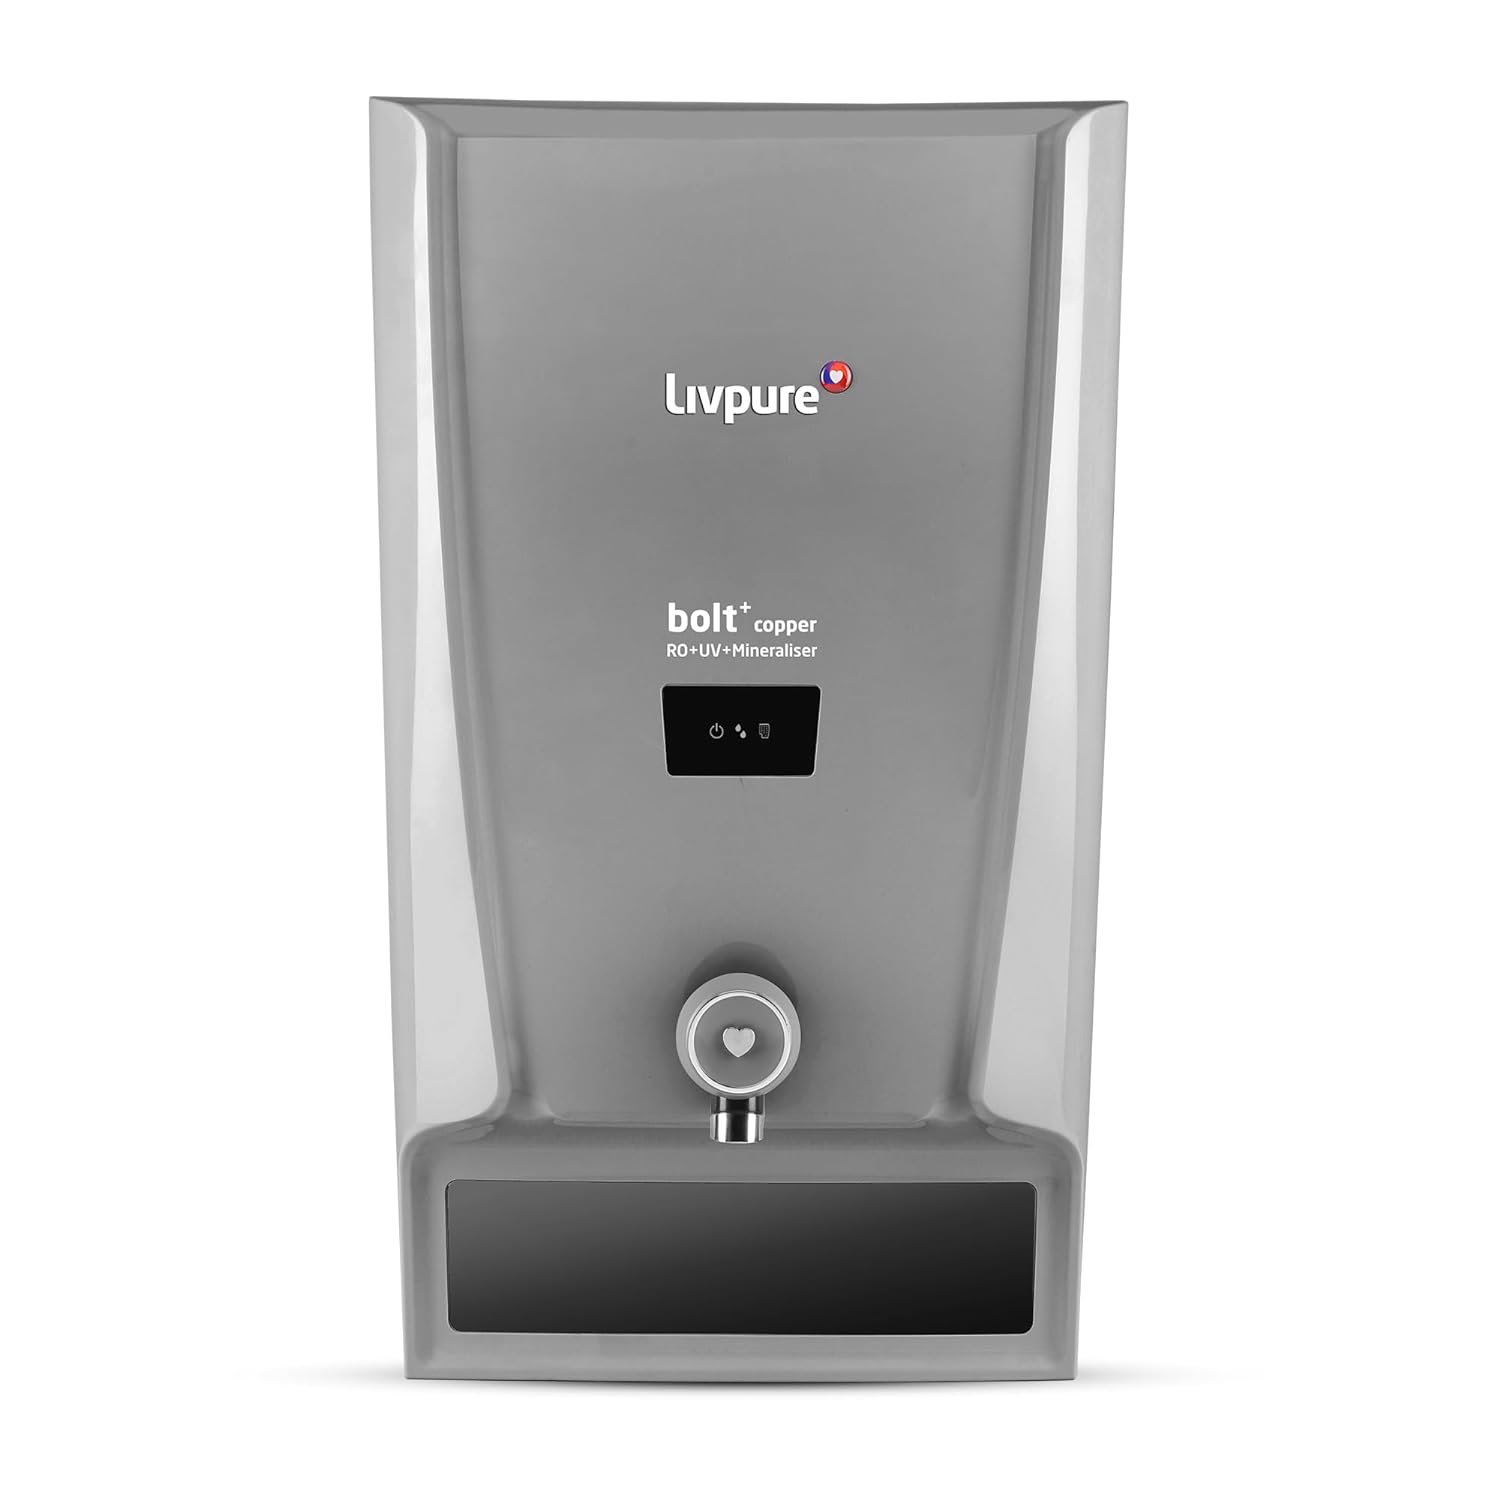 Livpure Bolt+ Copper with 80% Water Savings, Copper+RO+In-Tank UV+Mineraliser+Smart TDS Adjuster, 7 L tank, Water Purifier